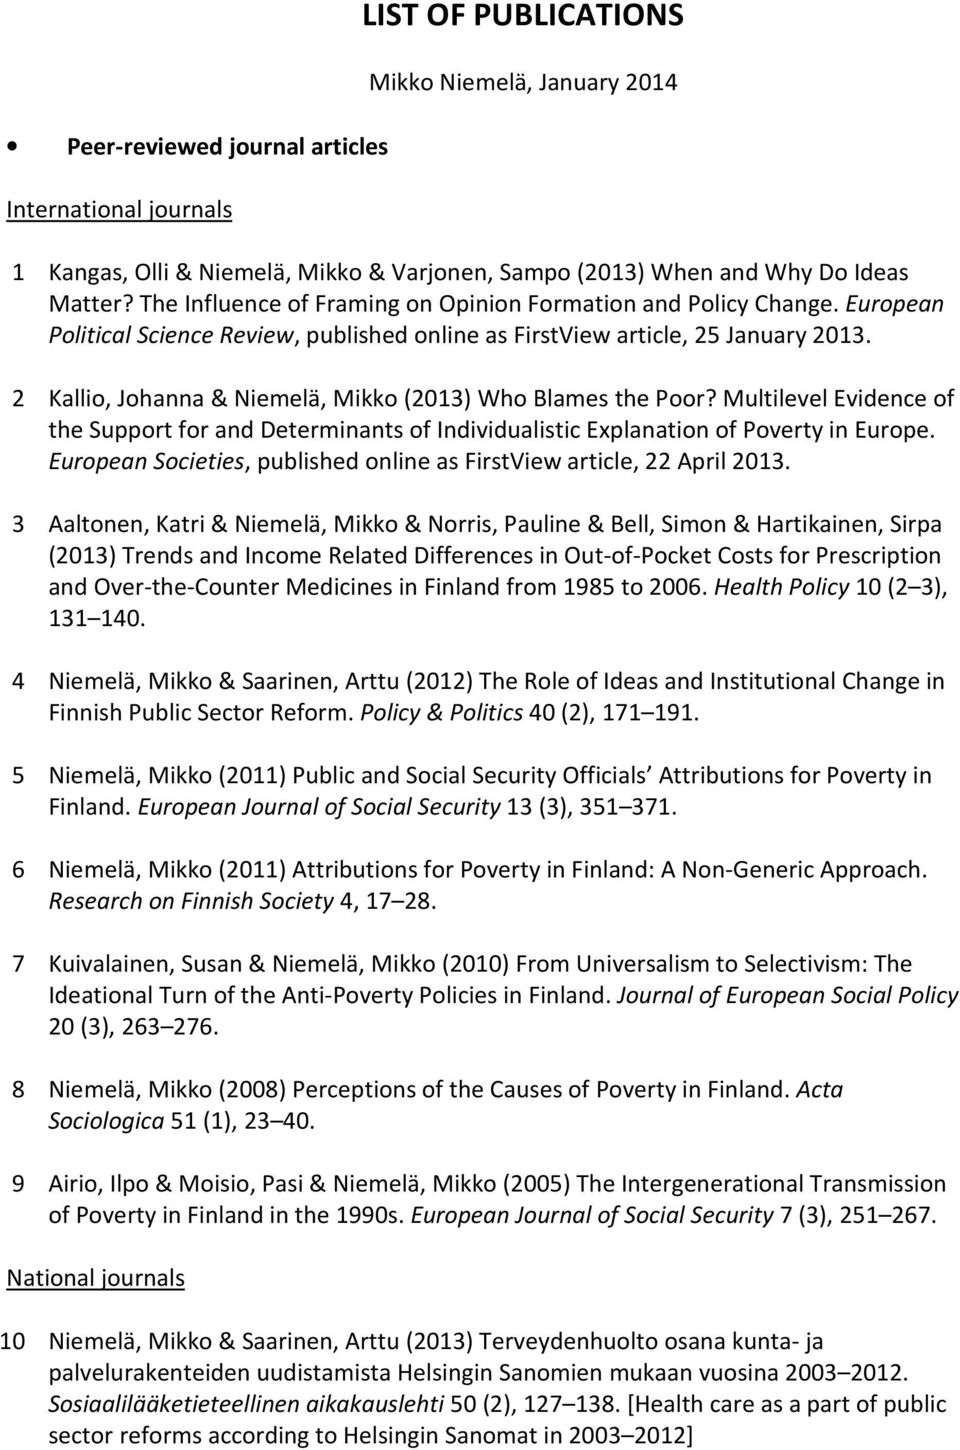 2 Kallio, Johanna & Niemelä, Mikko (2013) Who Blames the Poor? Multilevel Evidence of the Support for and Determinants of Individualistic Explanation of Poverty in Europe.